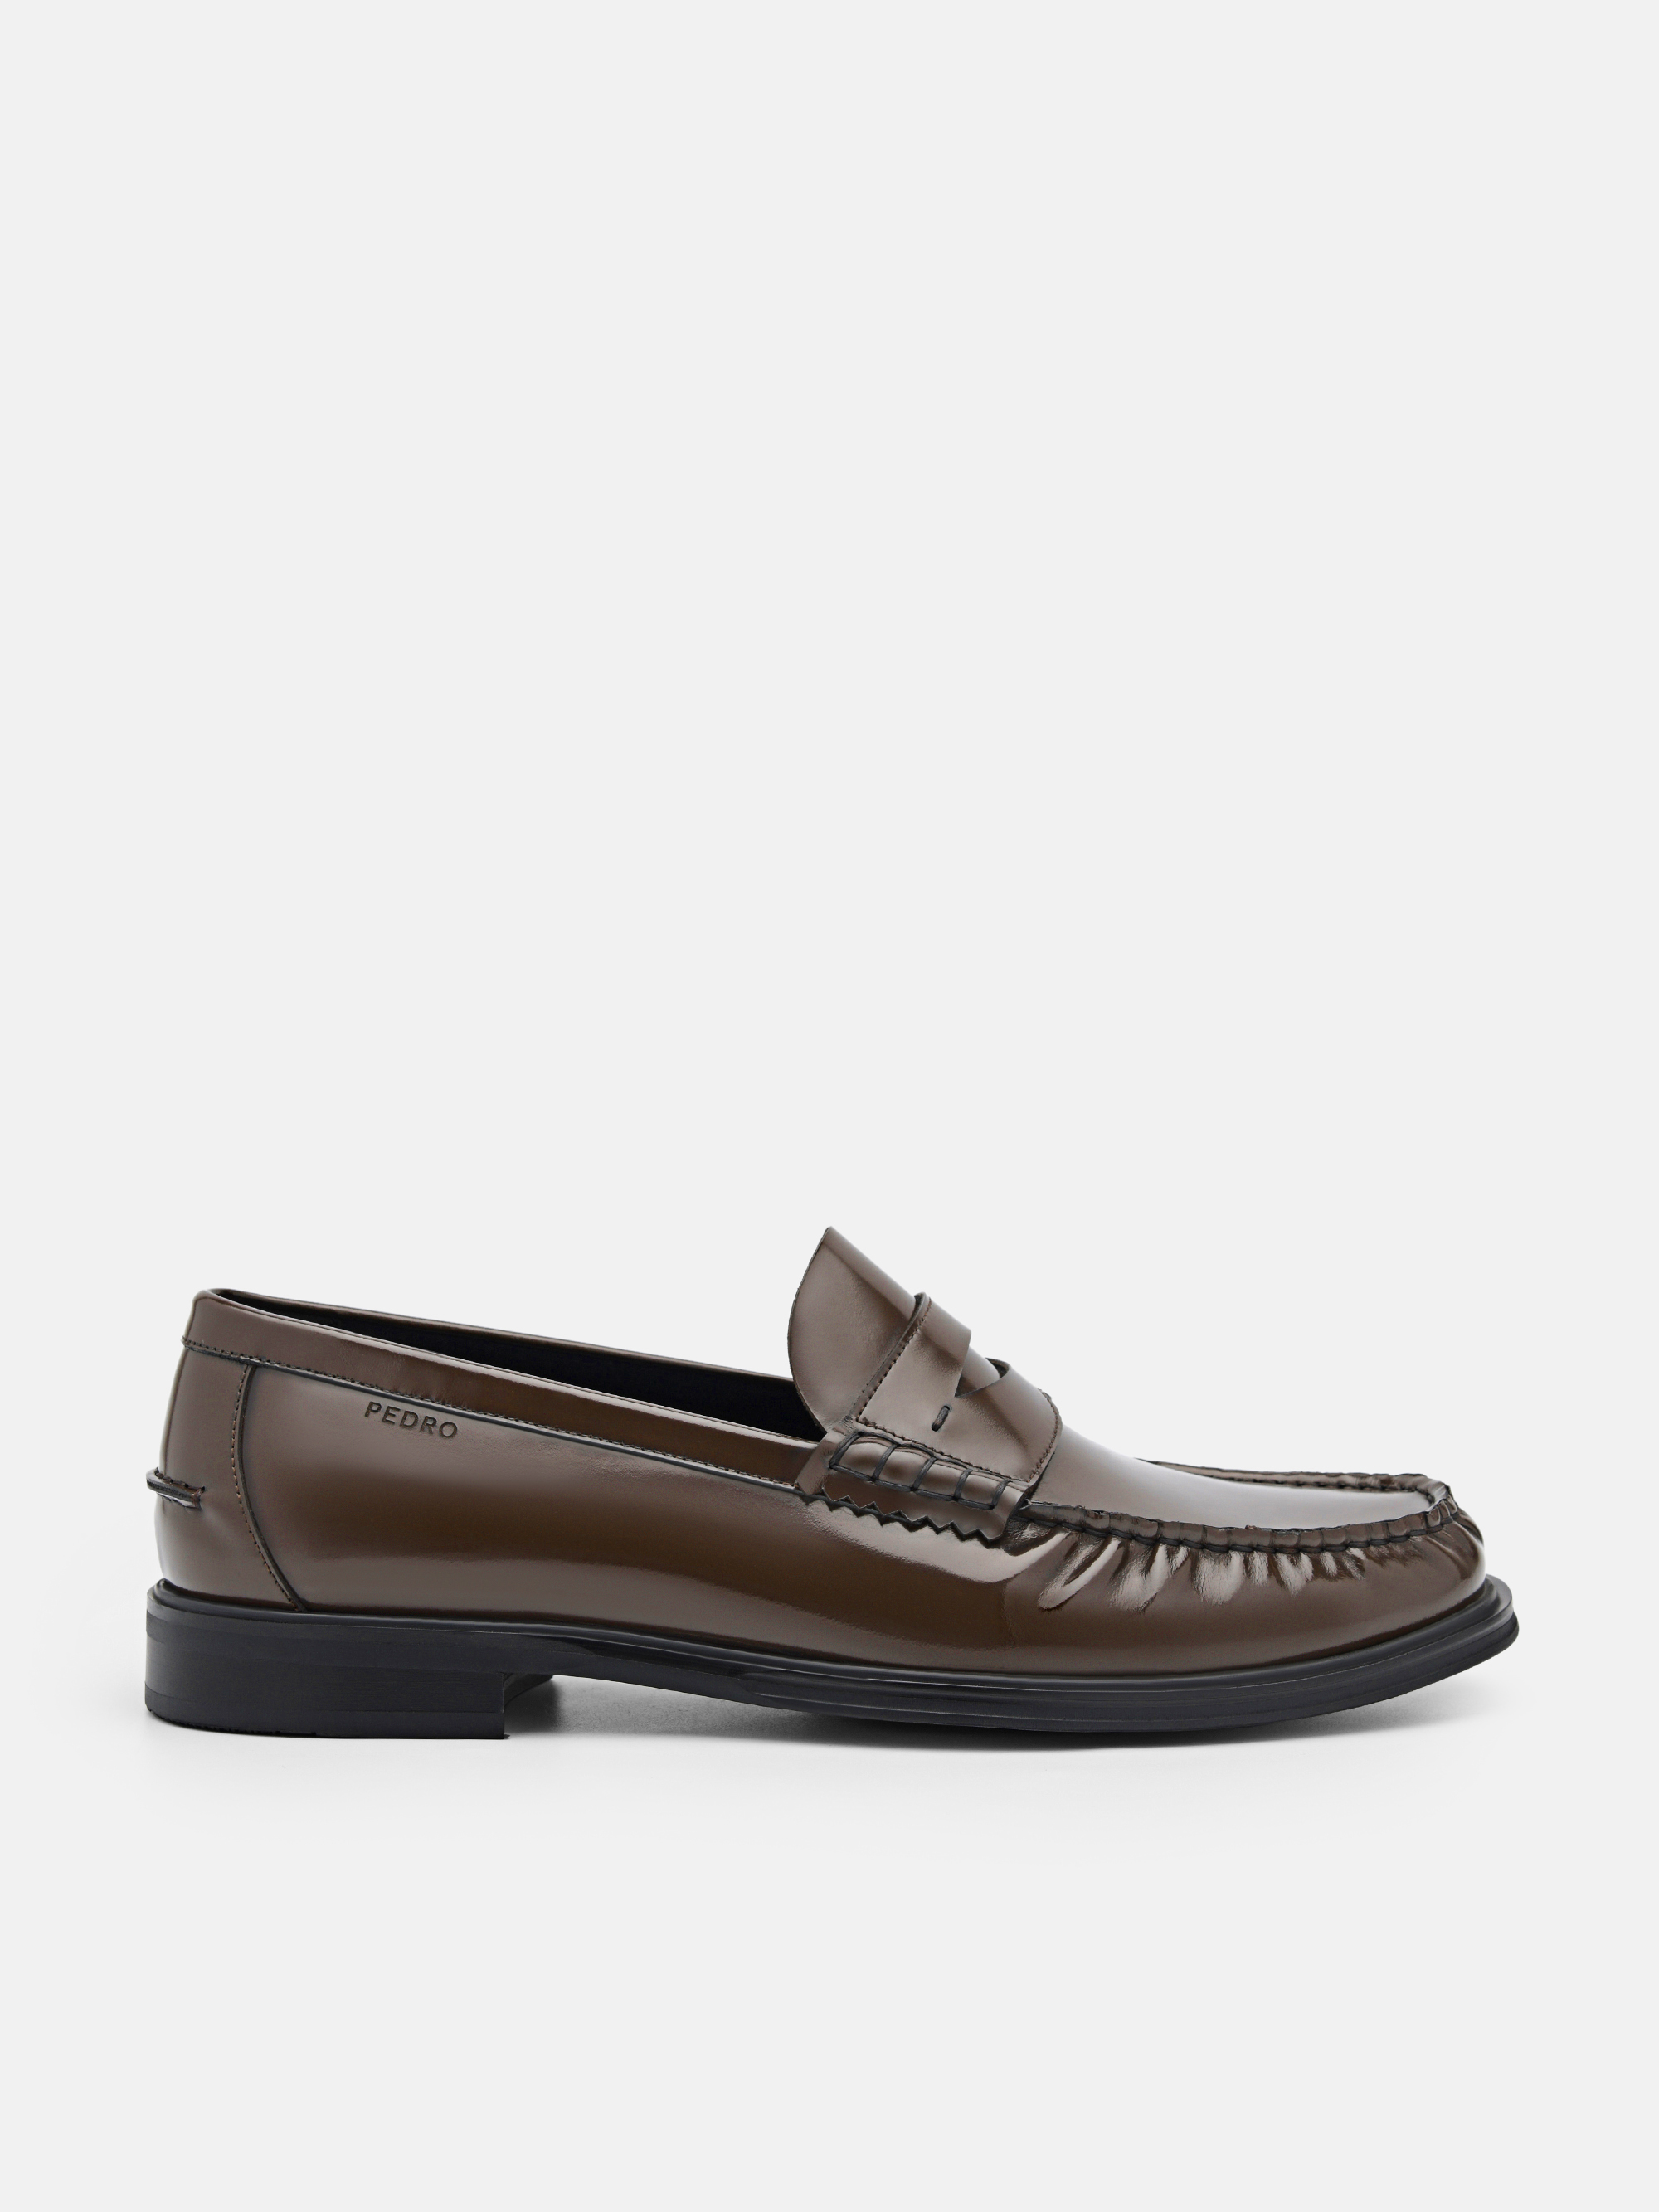 Brown Leather Penny Loafers - PEDRO SG